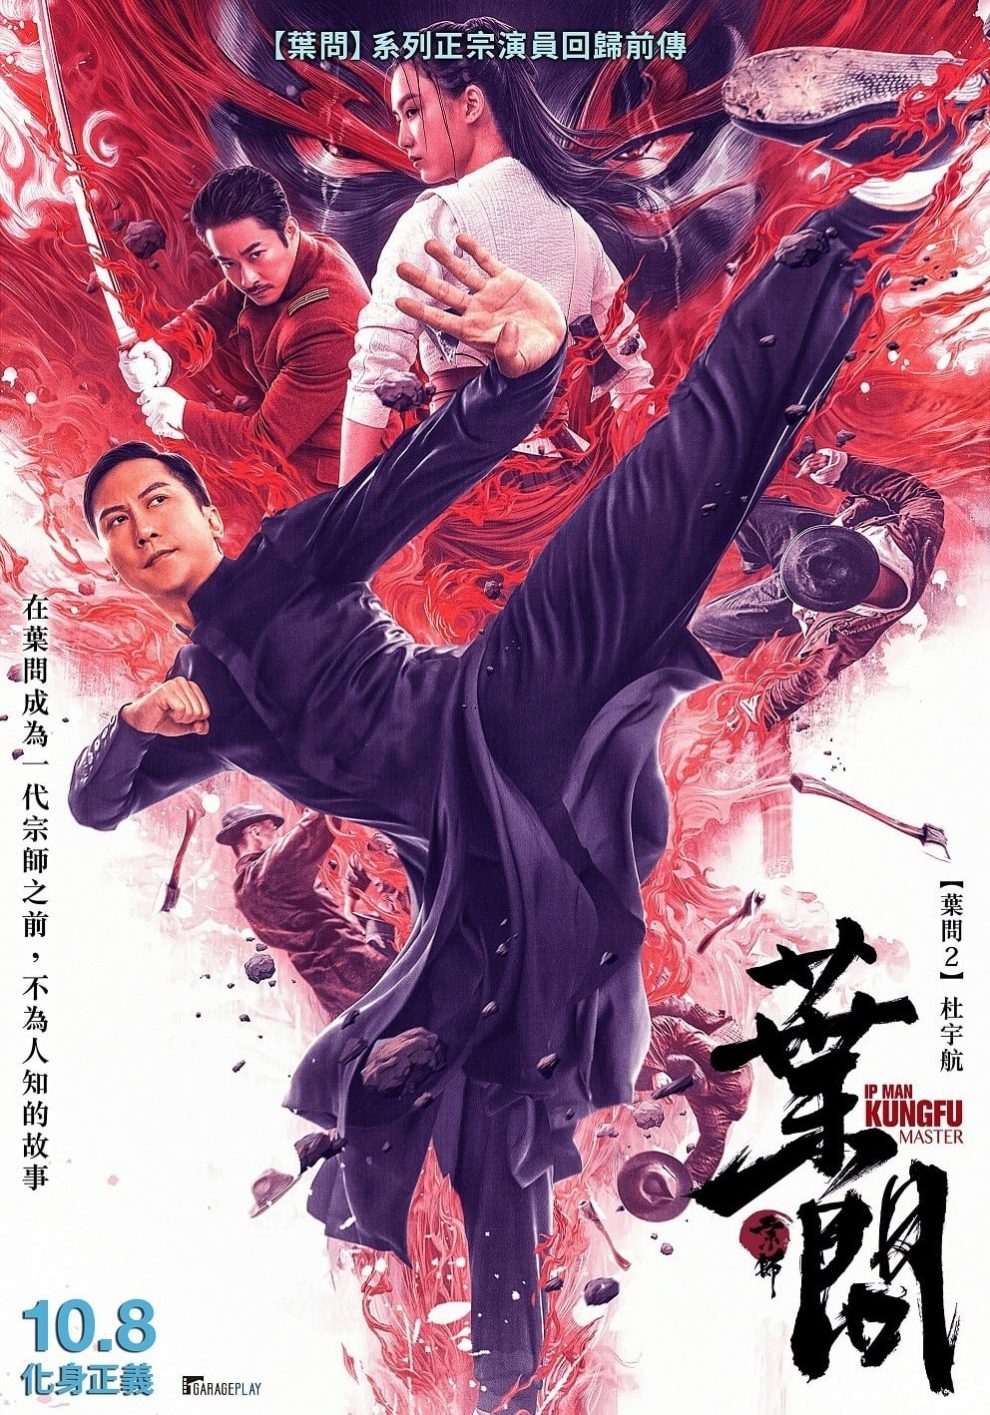 Poster for the movie "Ip Man: Kung Fu Master"